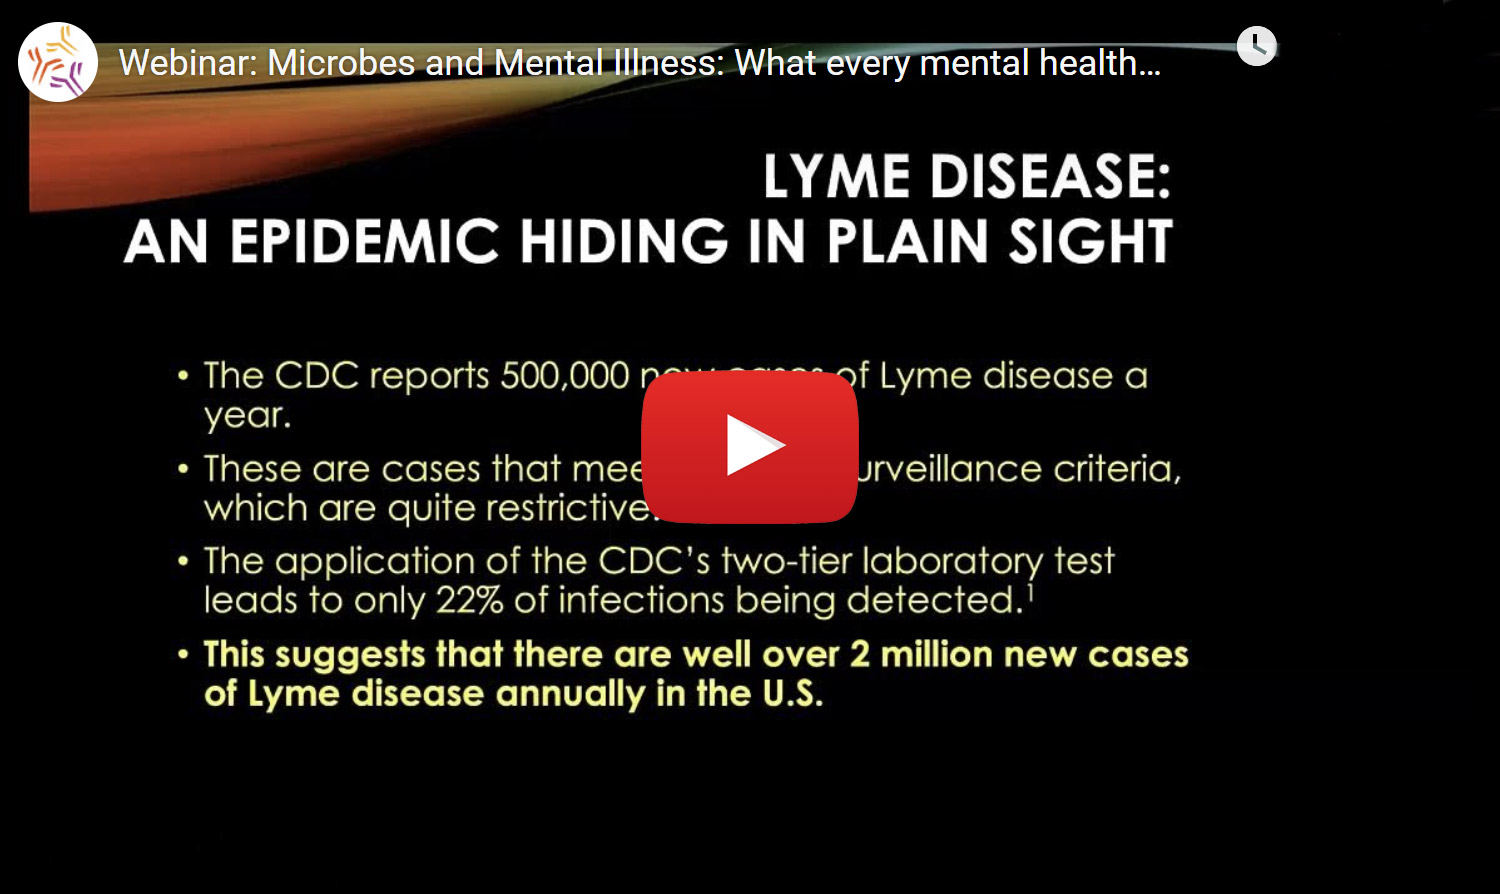 Microbes and Mental Illness: What Every Mental Health Worker Should Know About Lyme Disease Part 1